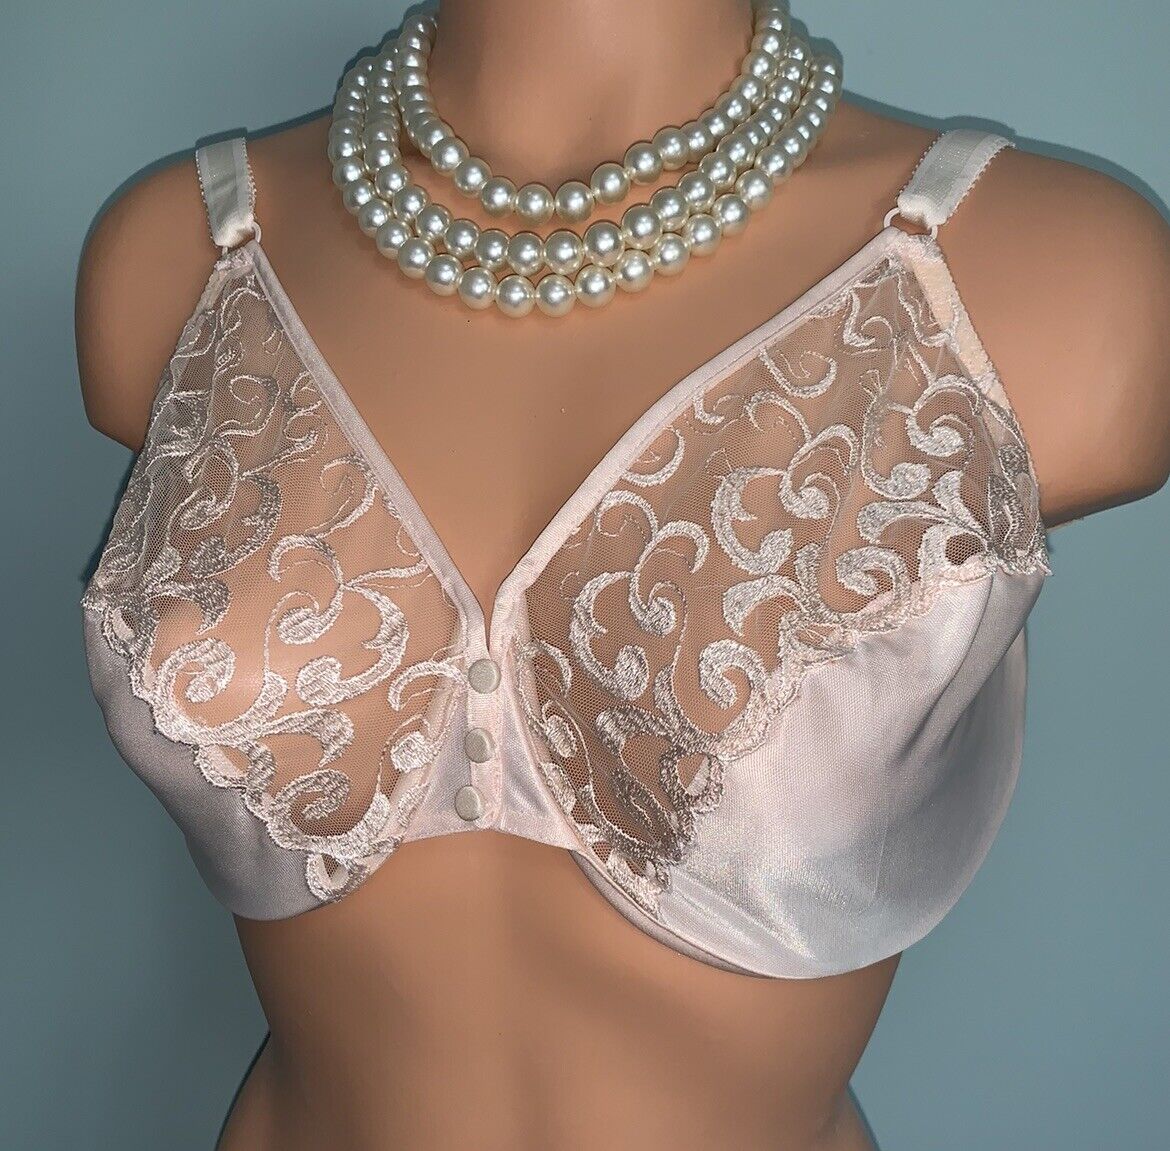 Vanity Fair Bra 34B, Pink Shiny Satiny, Unlined, Underwire, Style 75-142 -   Hong Kong